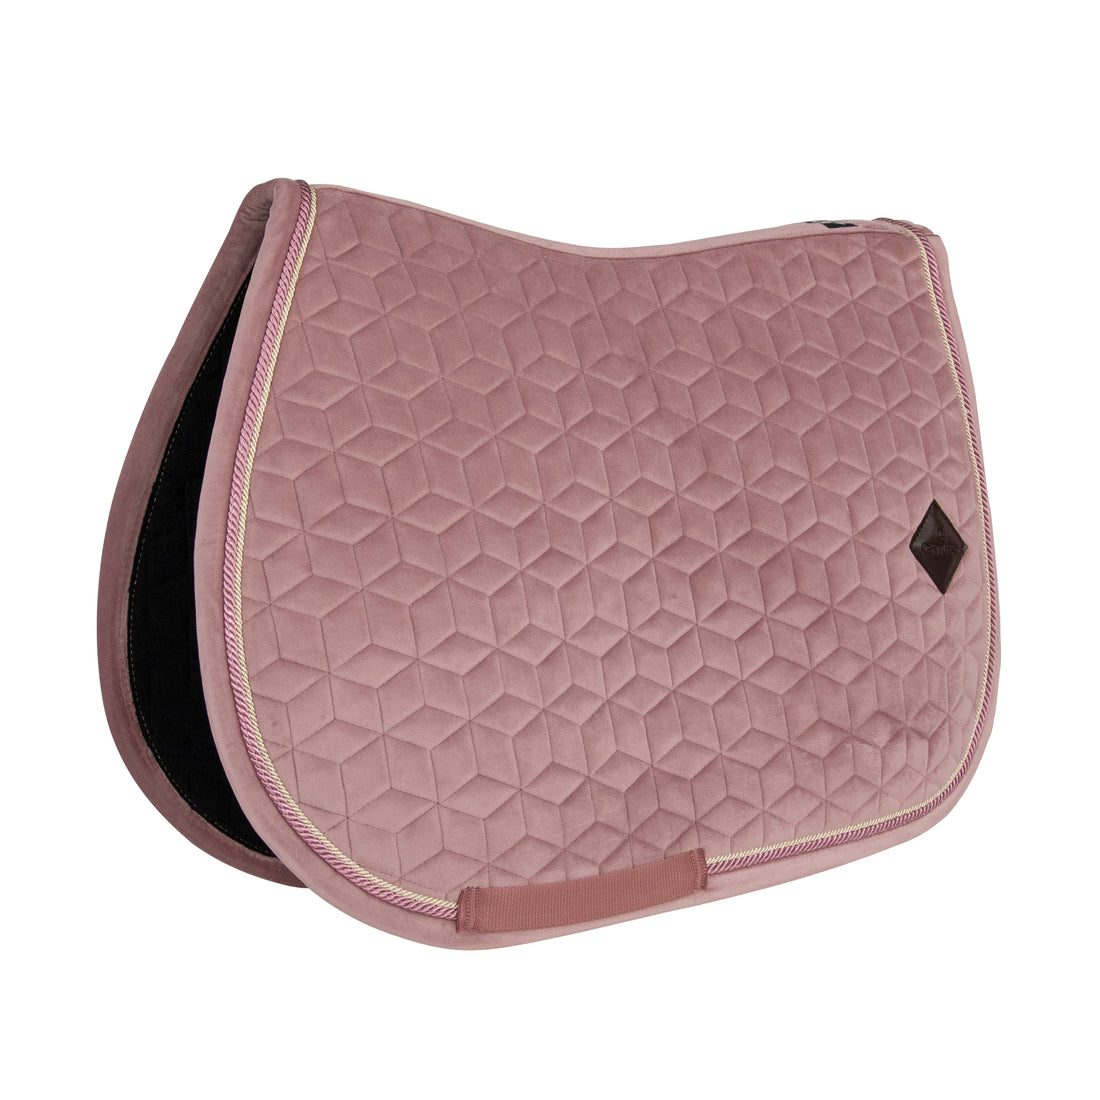 The Saddle Pad Basic Velvet is shaped for jumping and provides excellent cushioning between the horse’s back and the saddle while protecting against friction.